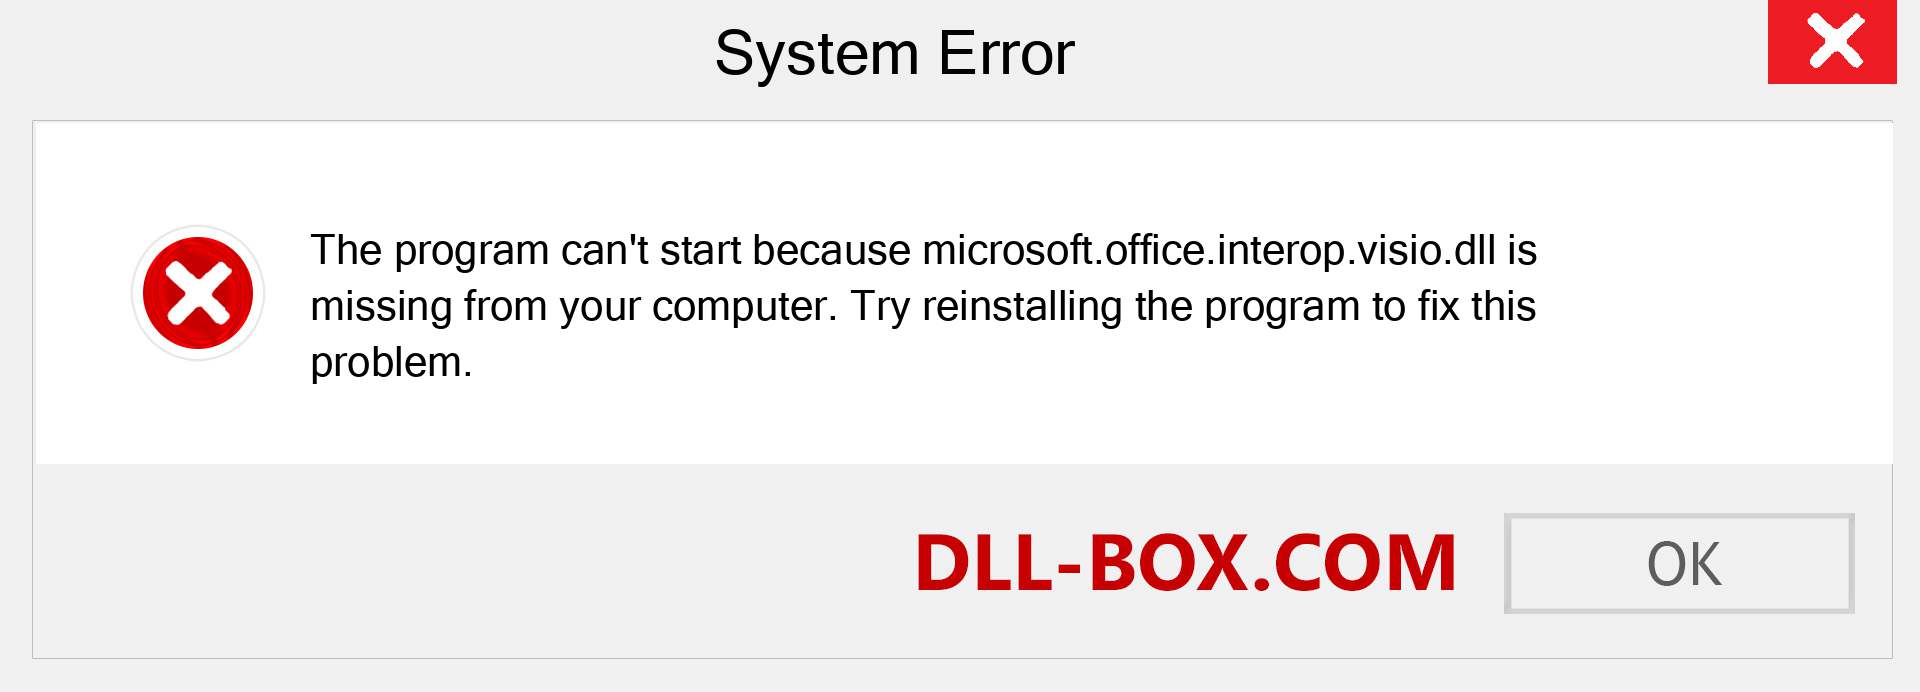  microsoft.office.interop.visio.dll file is missing?. Download for Windows 7, 8, 10 - Fix  microsoft.office.interop.visio dll Missing Error on Windows, photos, images